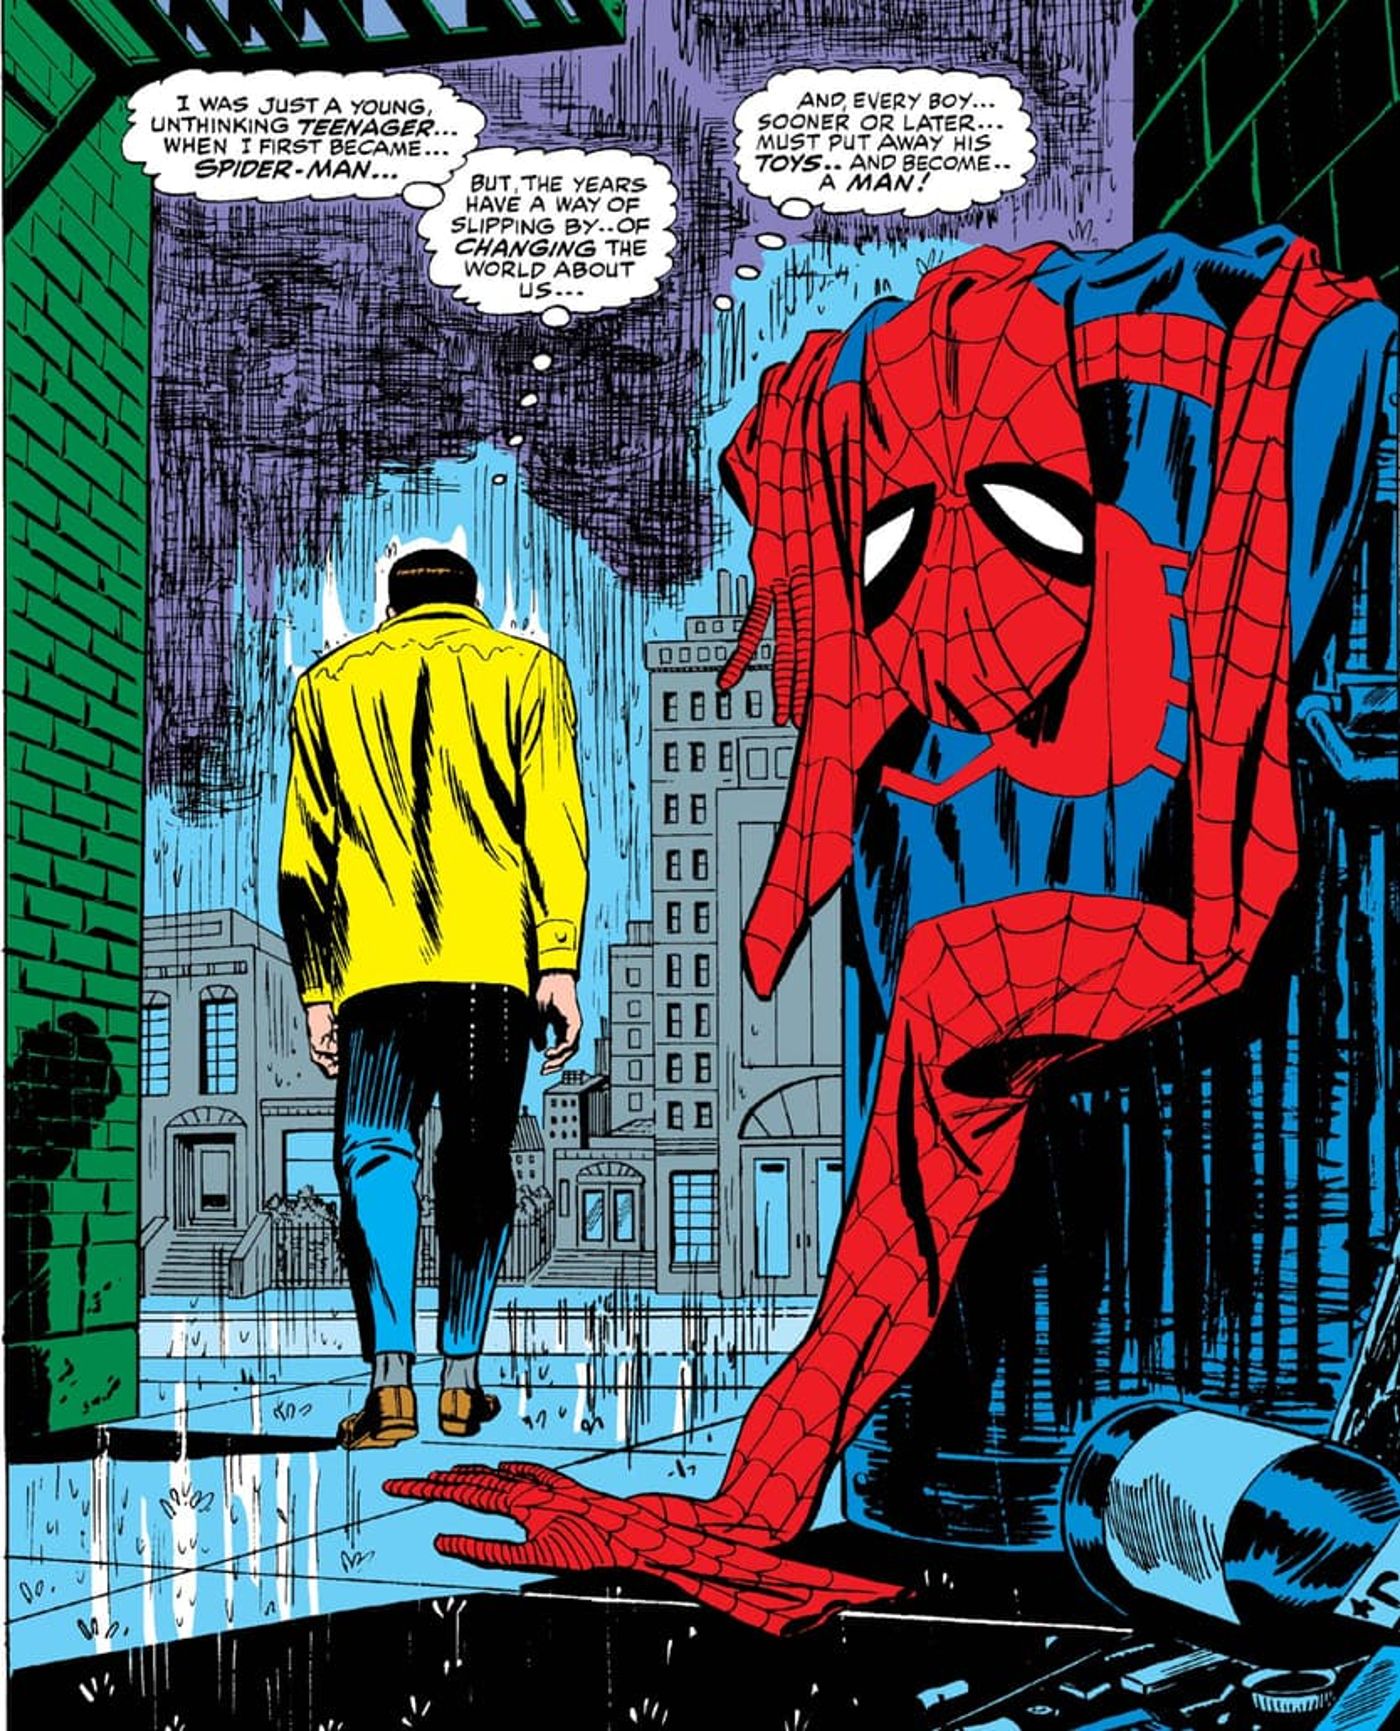 Spider-Man No More iconic alleyway panel.